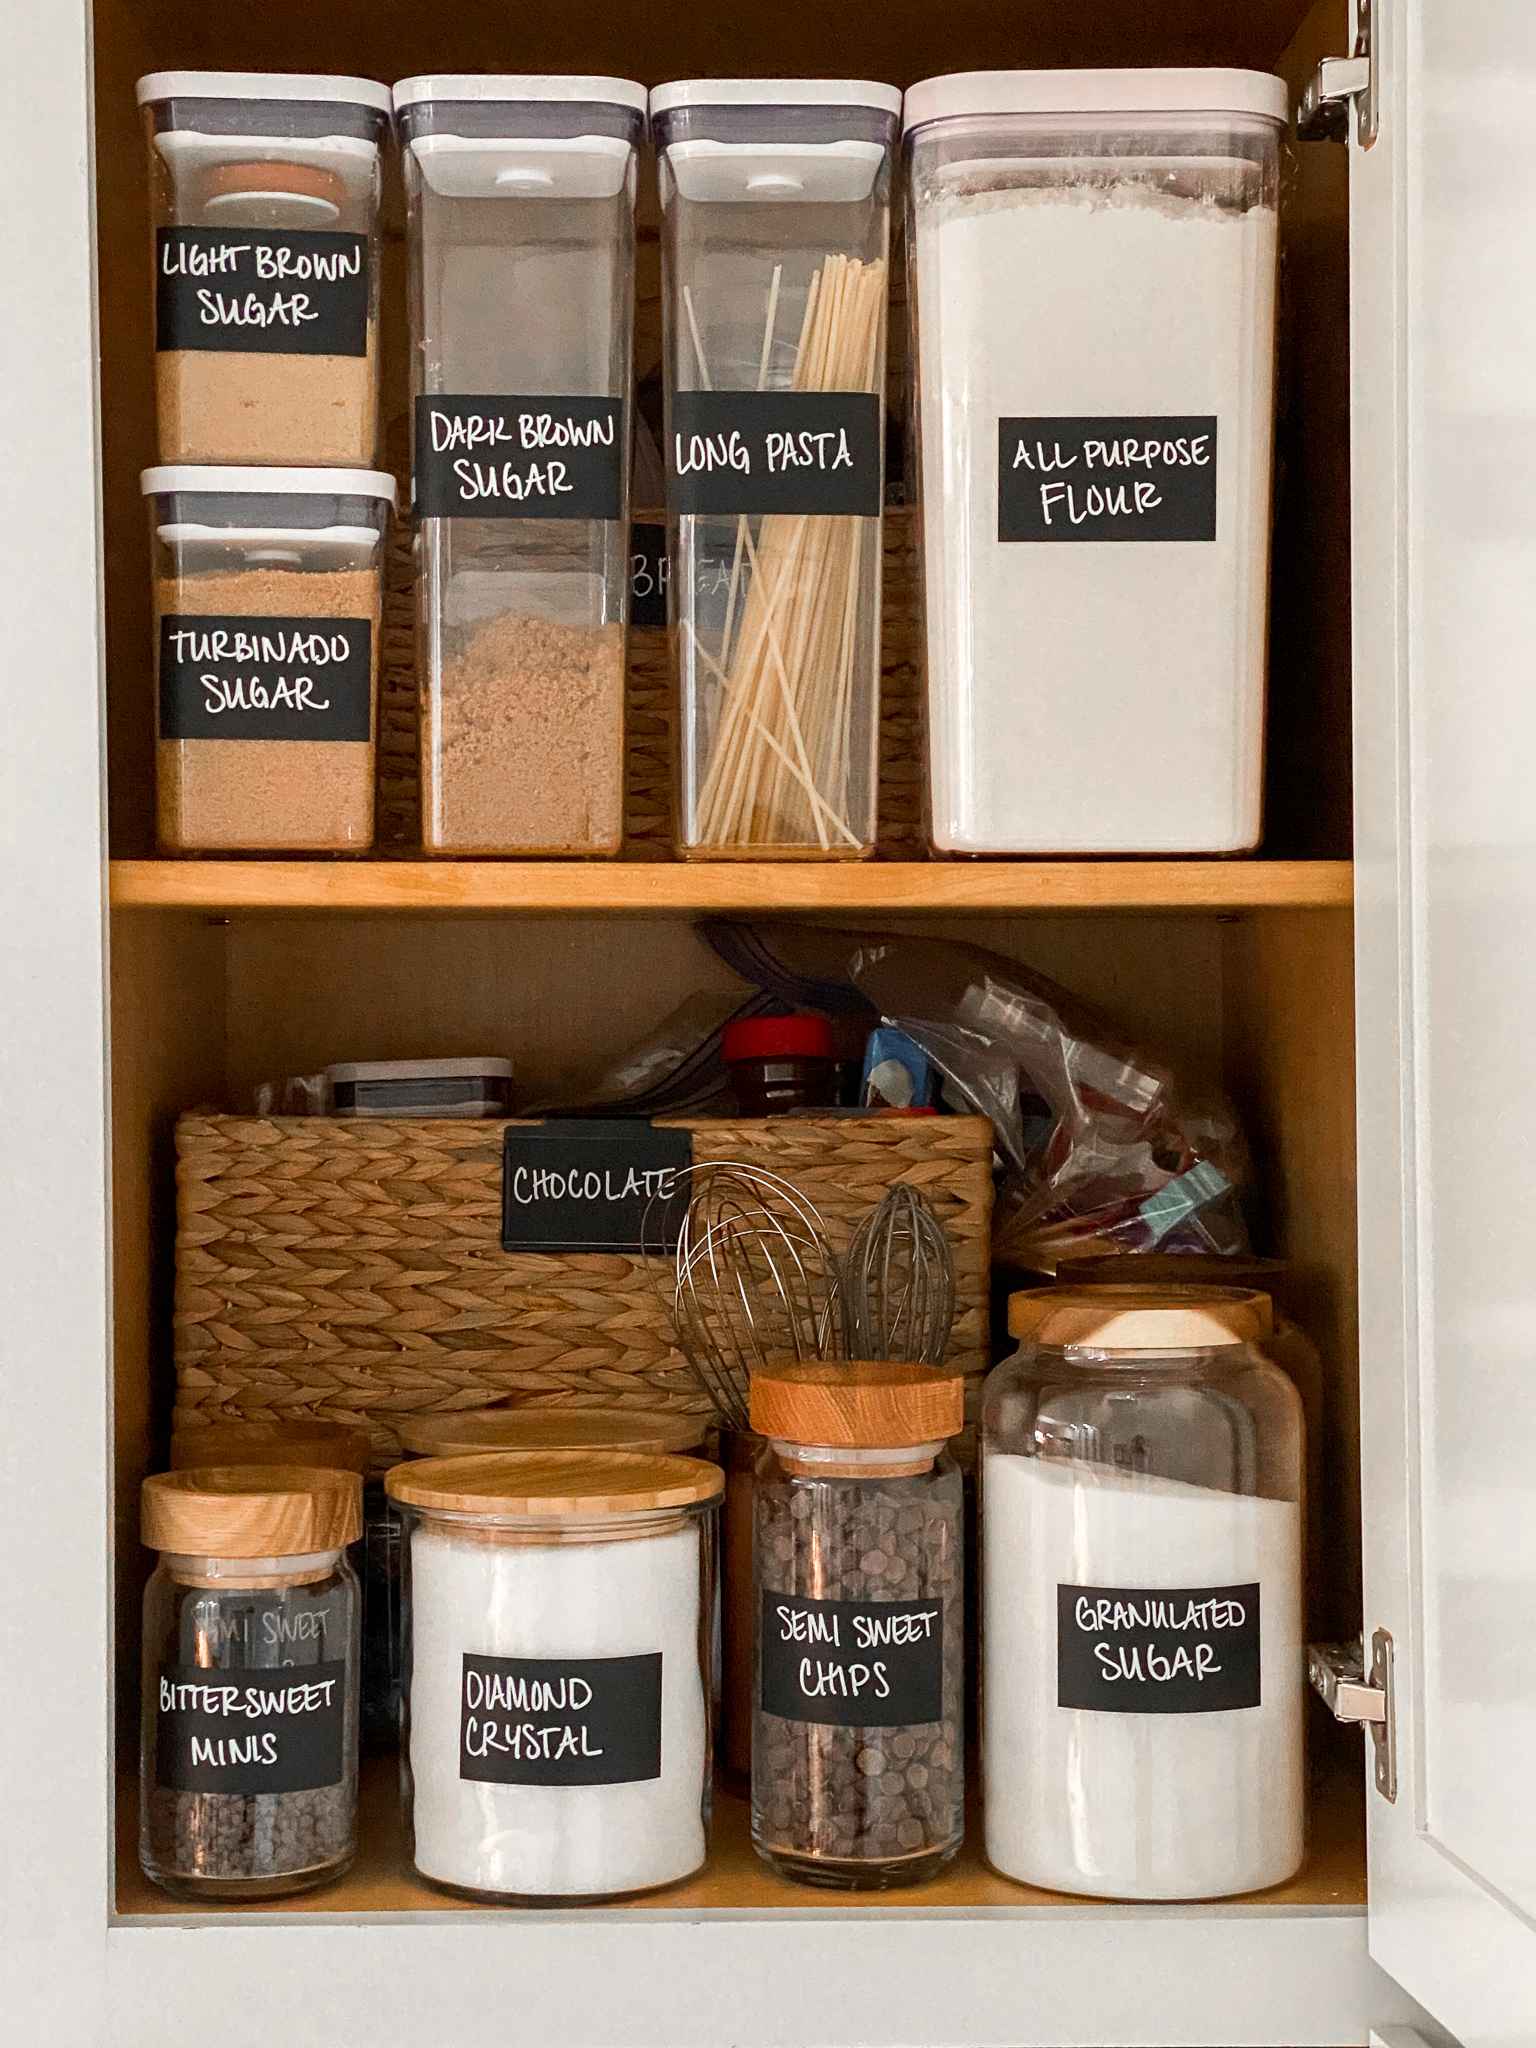 How To Organize A Deep Pantry - DNQ Solutions